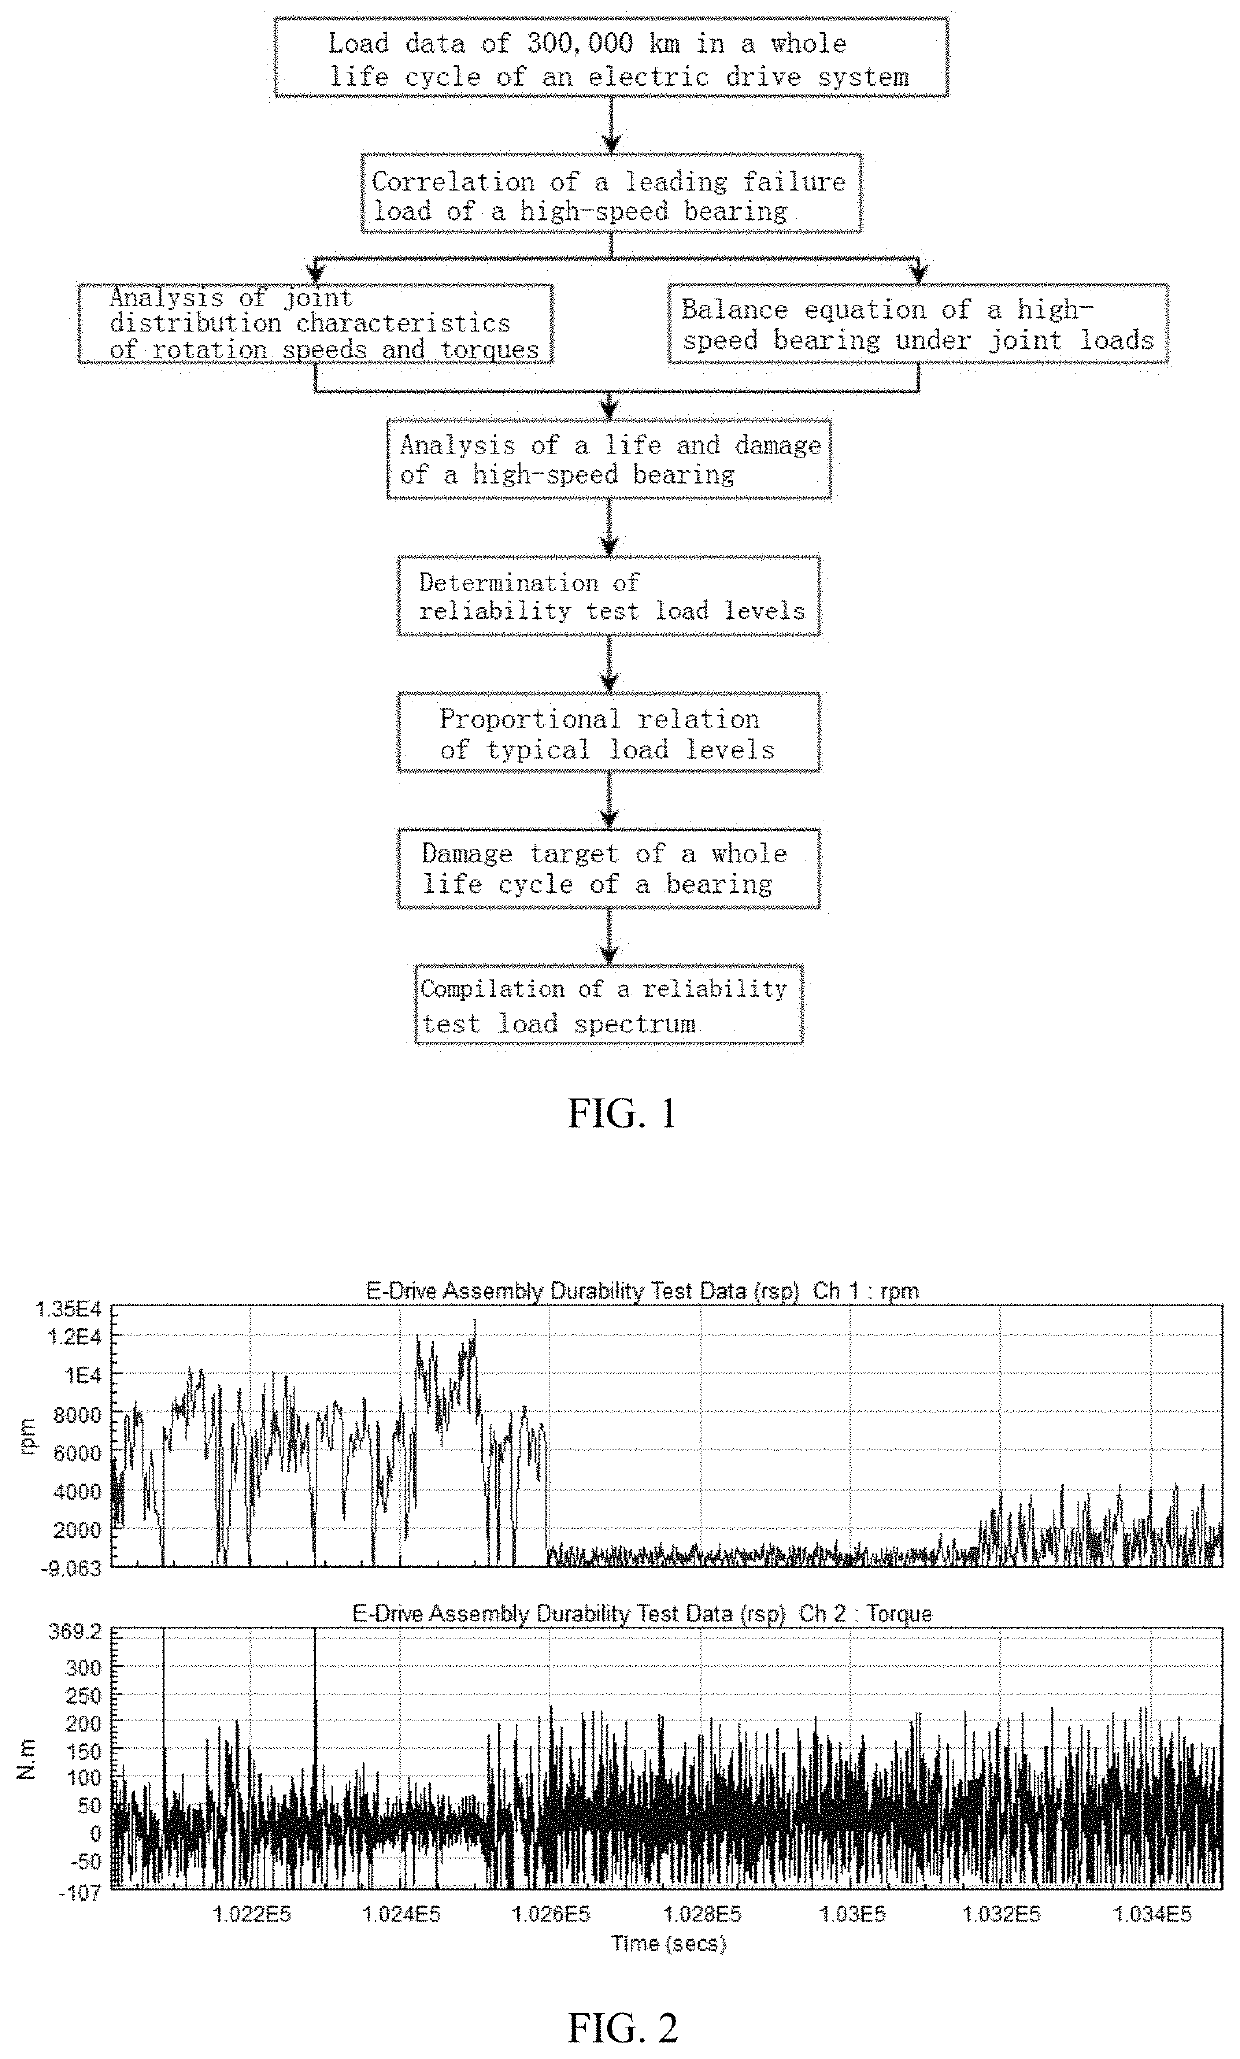 Compilation Method for Reliability Test Load Spectrum of High-Speed Bearing of Electric Drive System